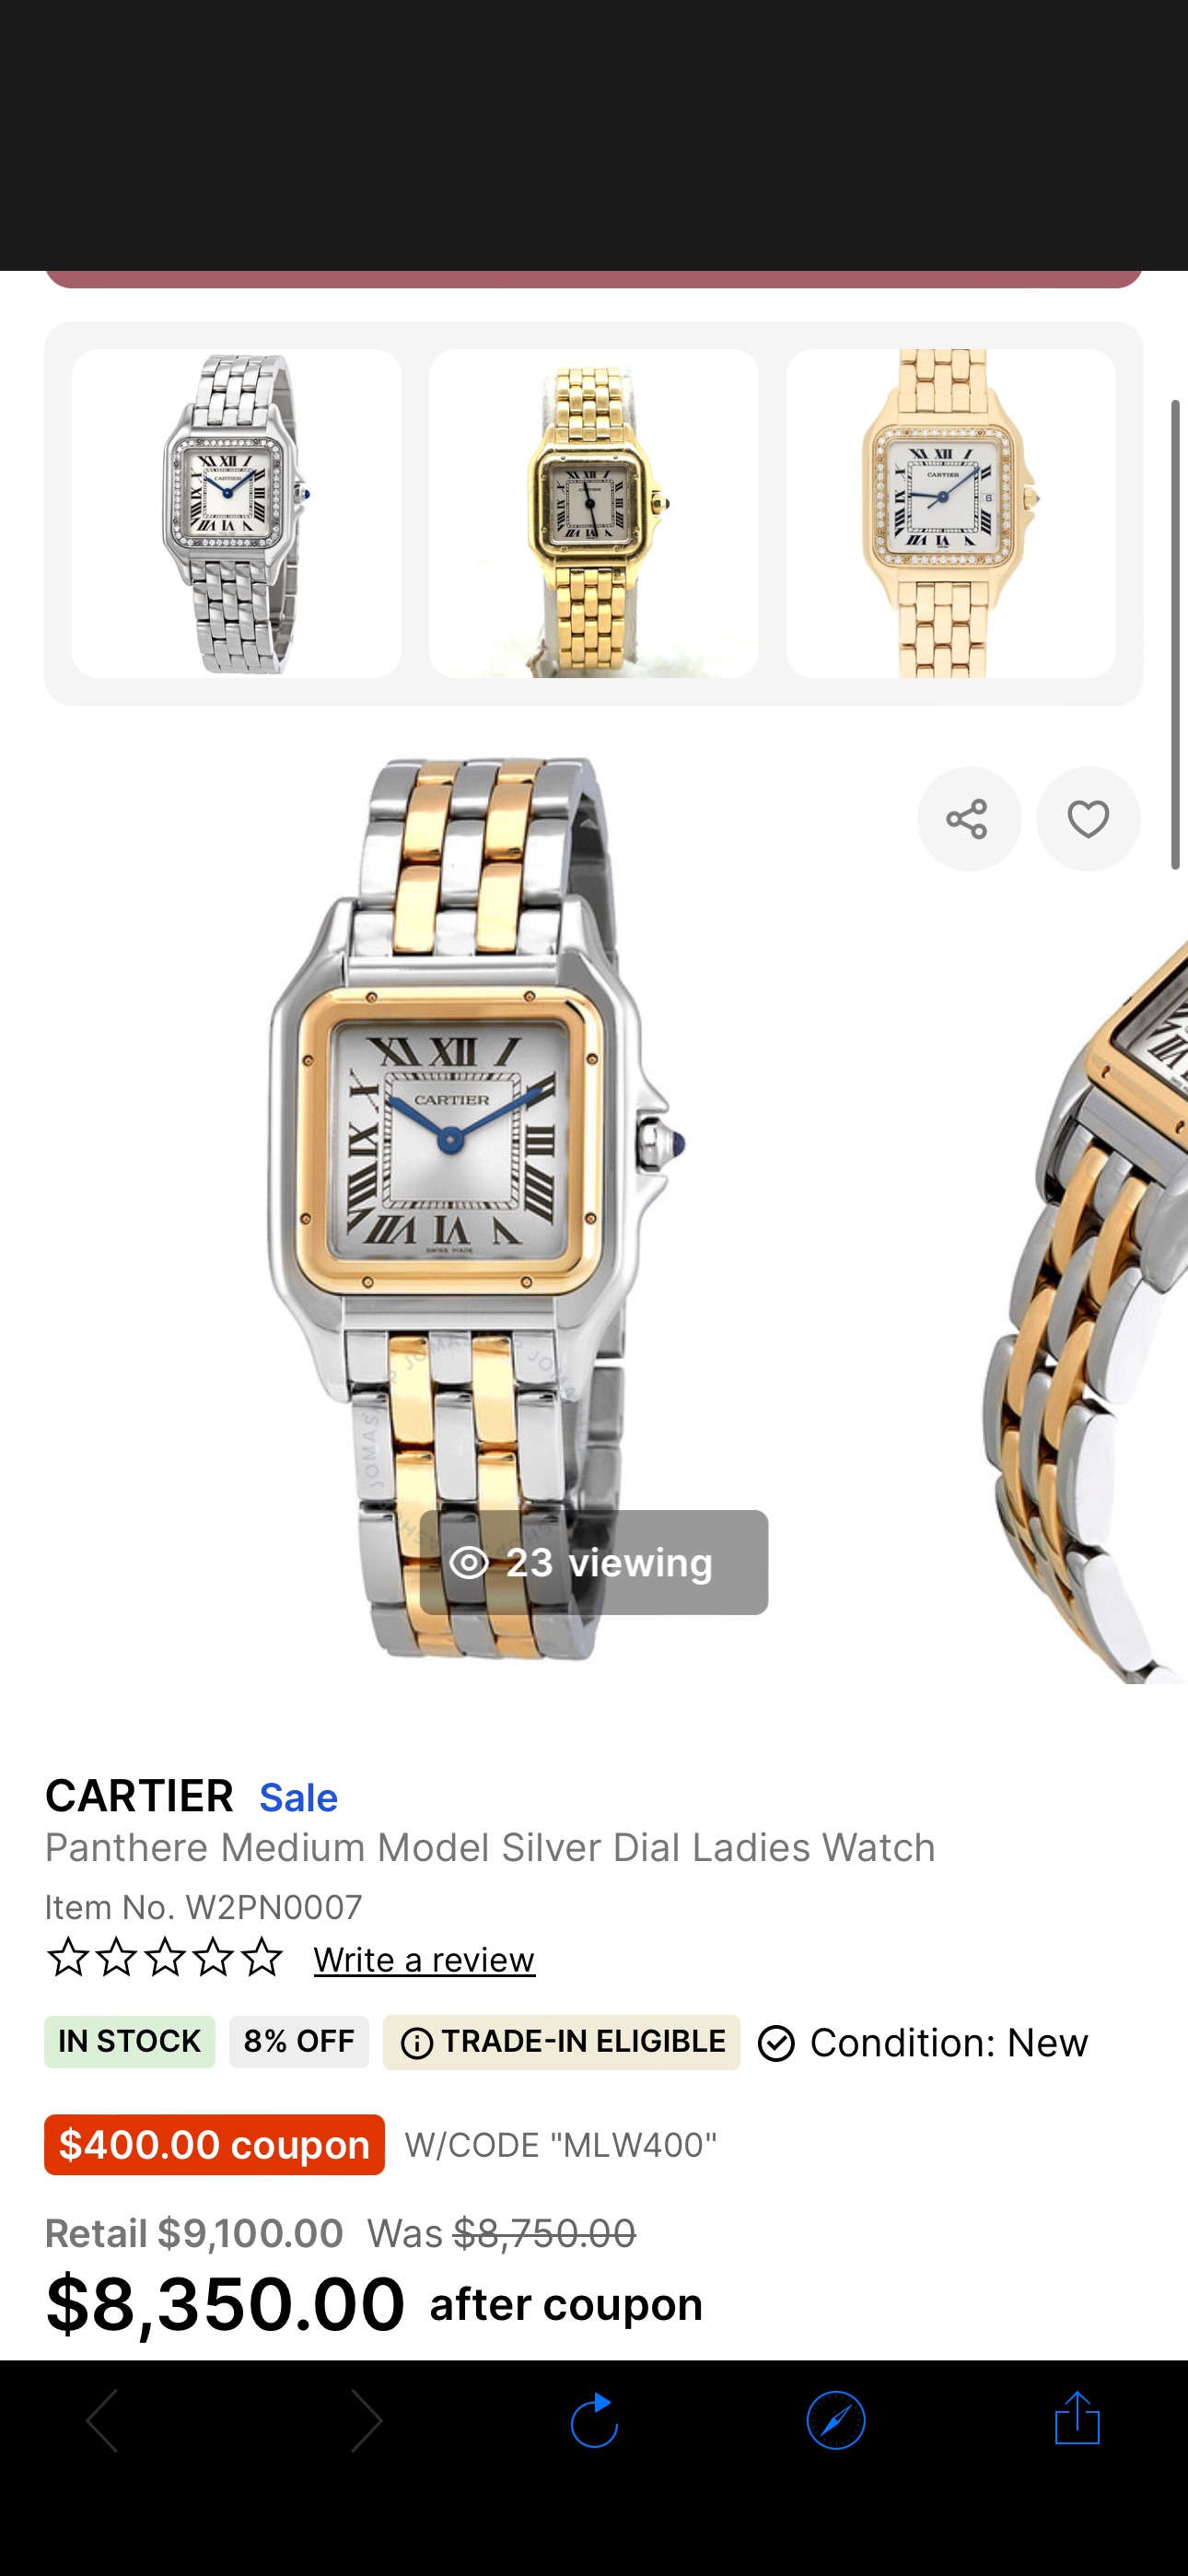 Cartier Panthere Medium Model Silver Dial Ladies Watch W2PN0007 7613268812662 - Watches, Panthere - Jomashop